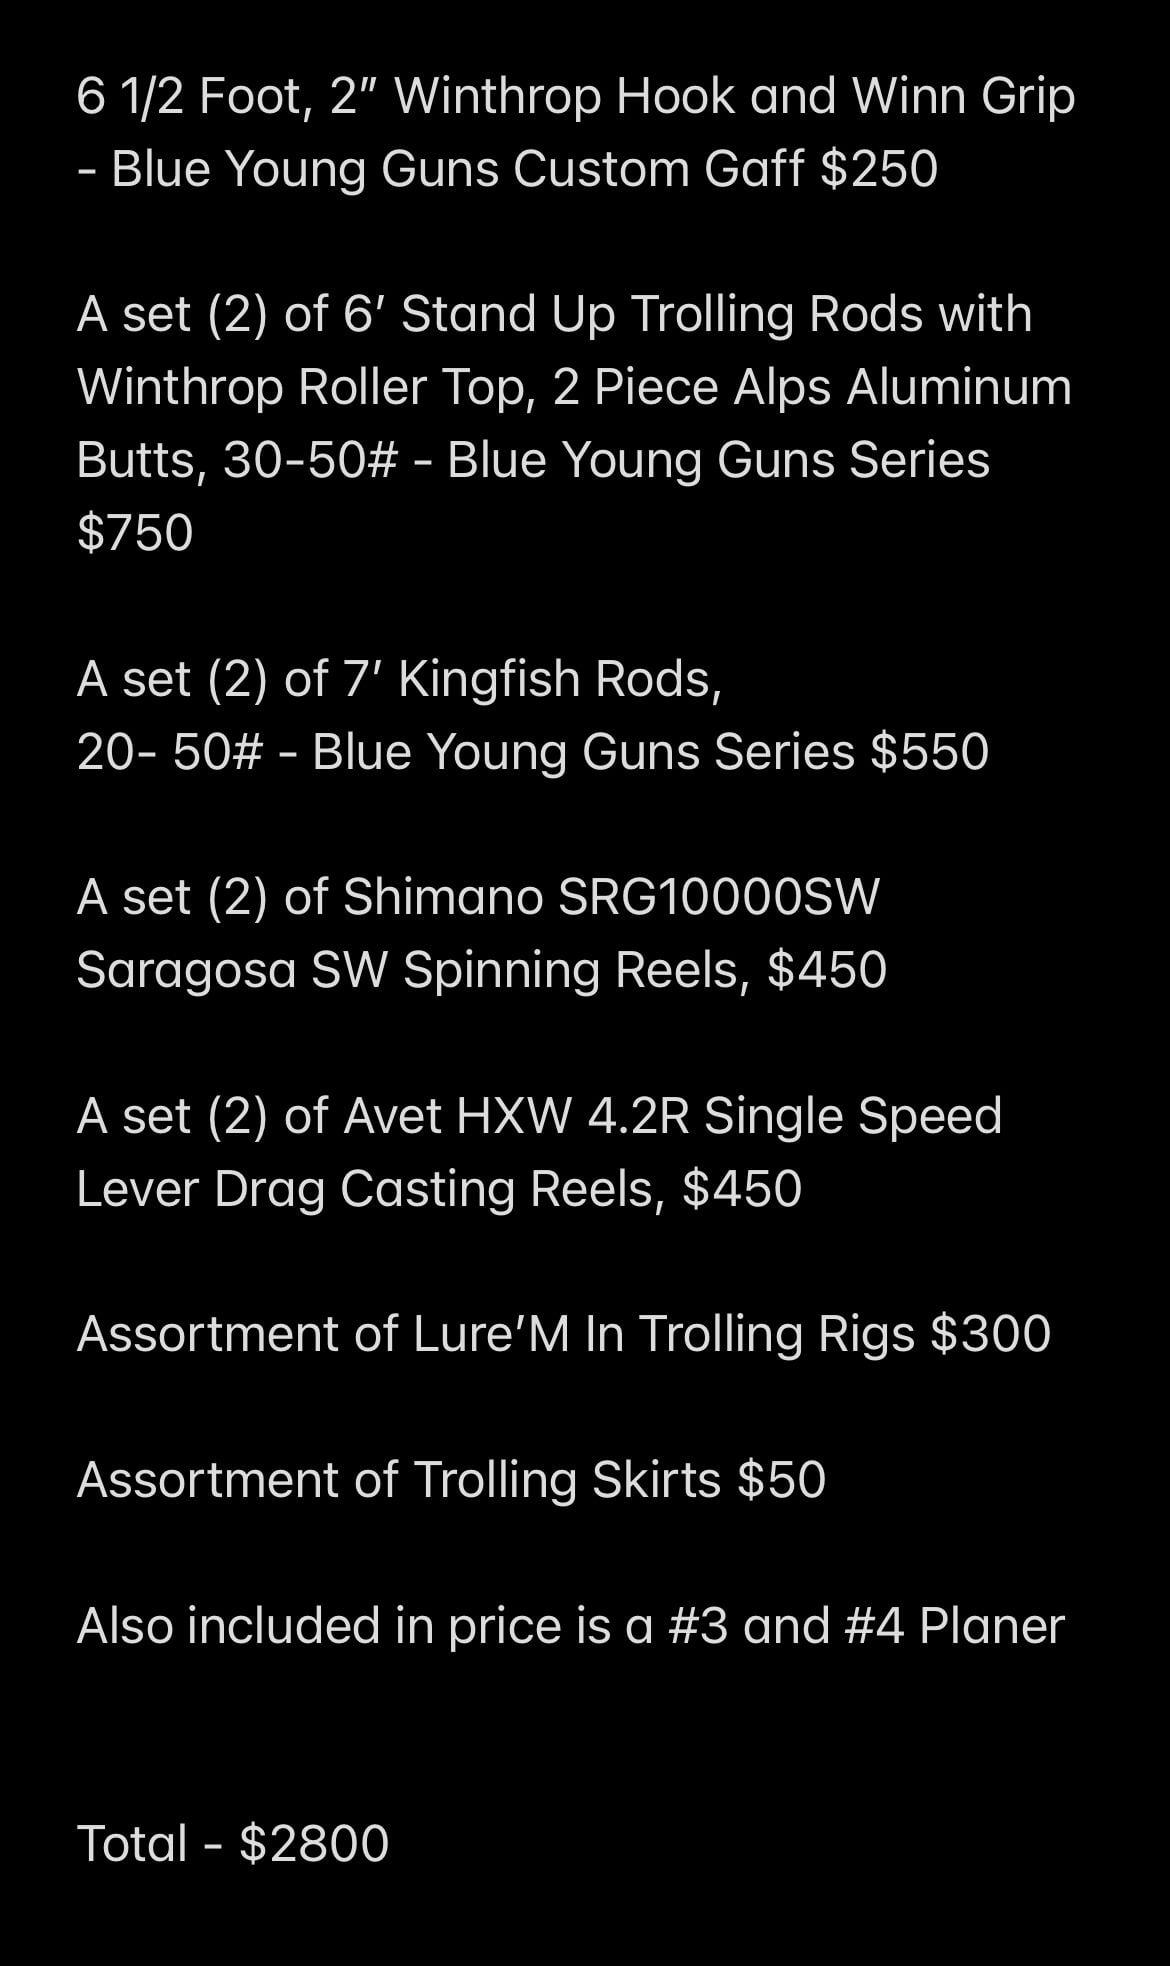 Connley Blue Young Guns Fishing Rod/Reel set up, Lure'M In Trolling Rigs  and Misc. - The Hull Truth - Boating and Fishing Forum